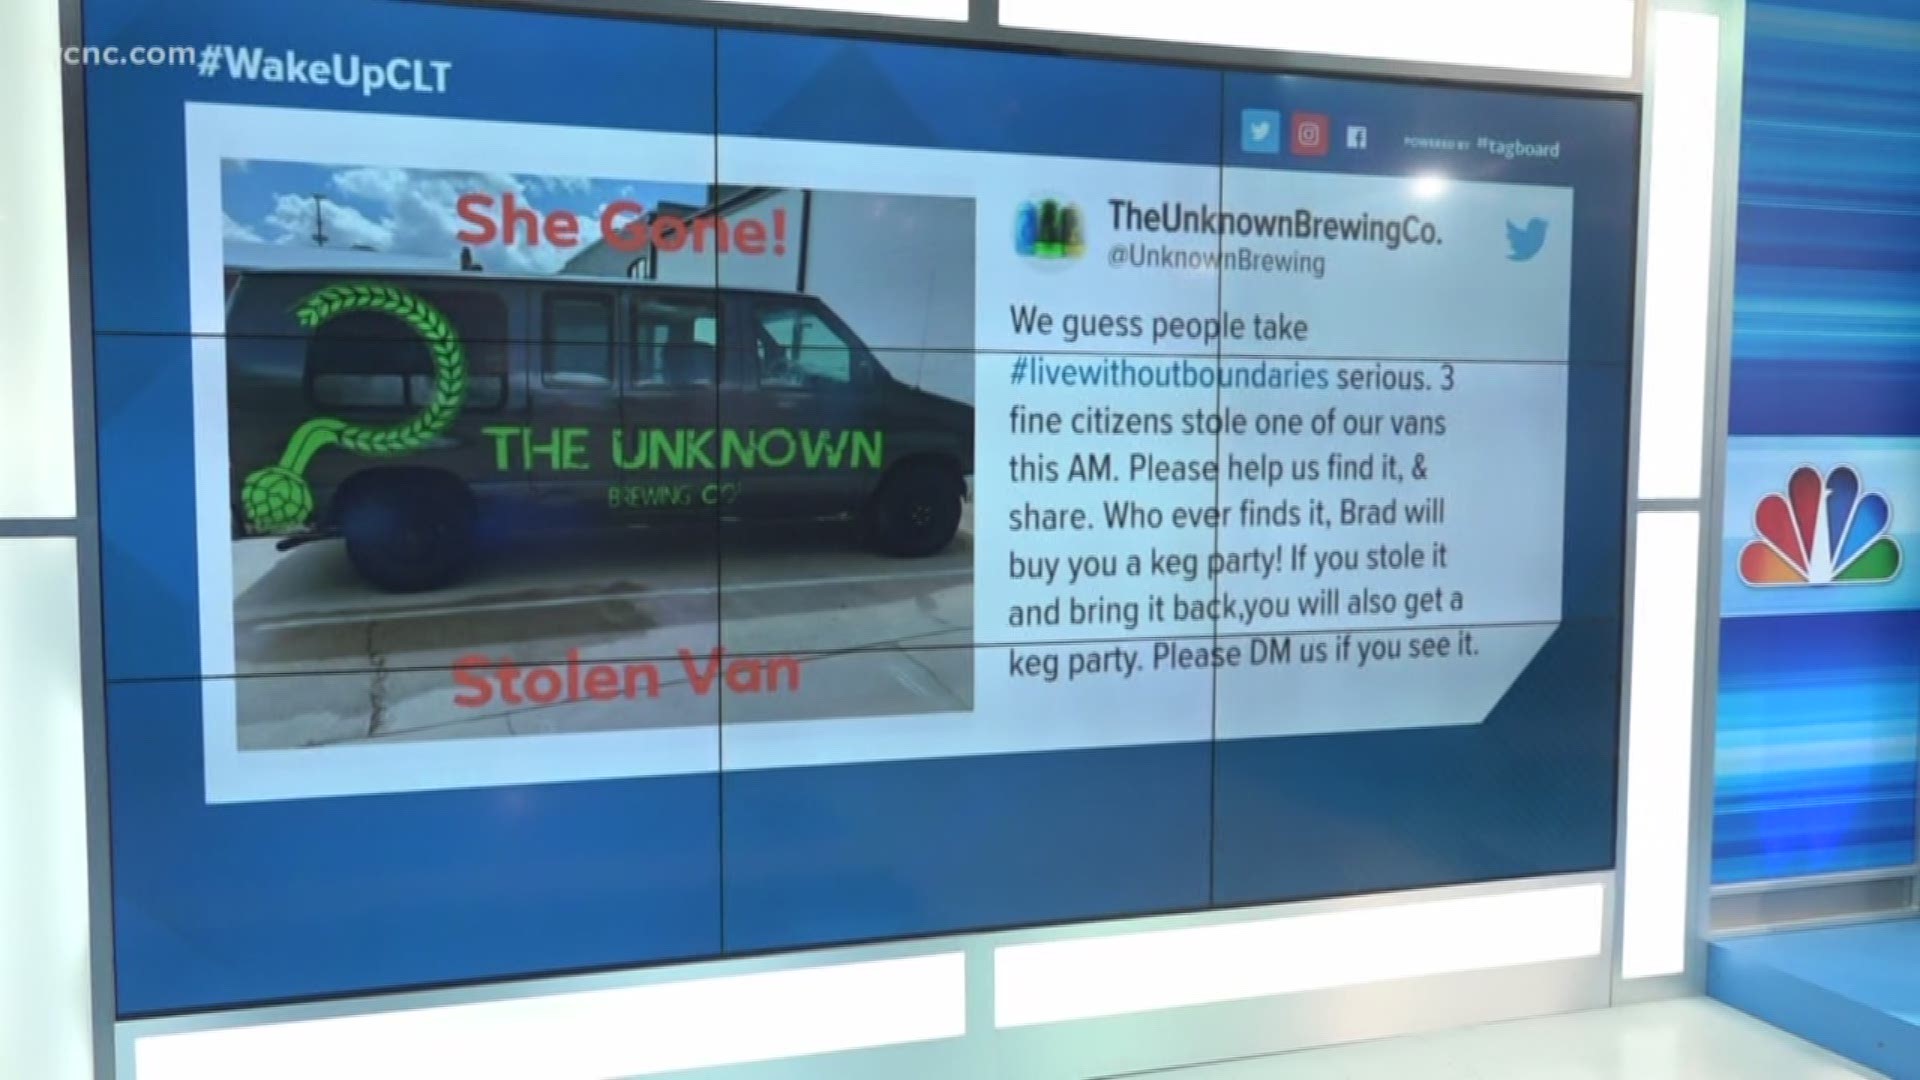 The Unknown Brewing Company put up a very popular reward when their van was stolen earlier this week.